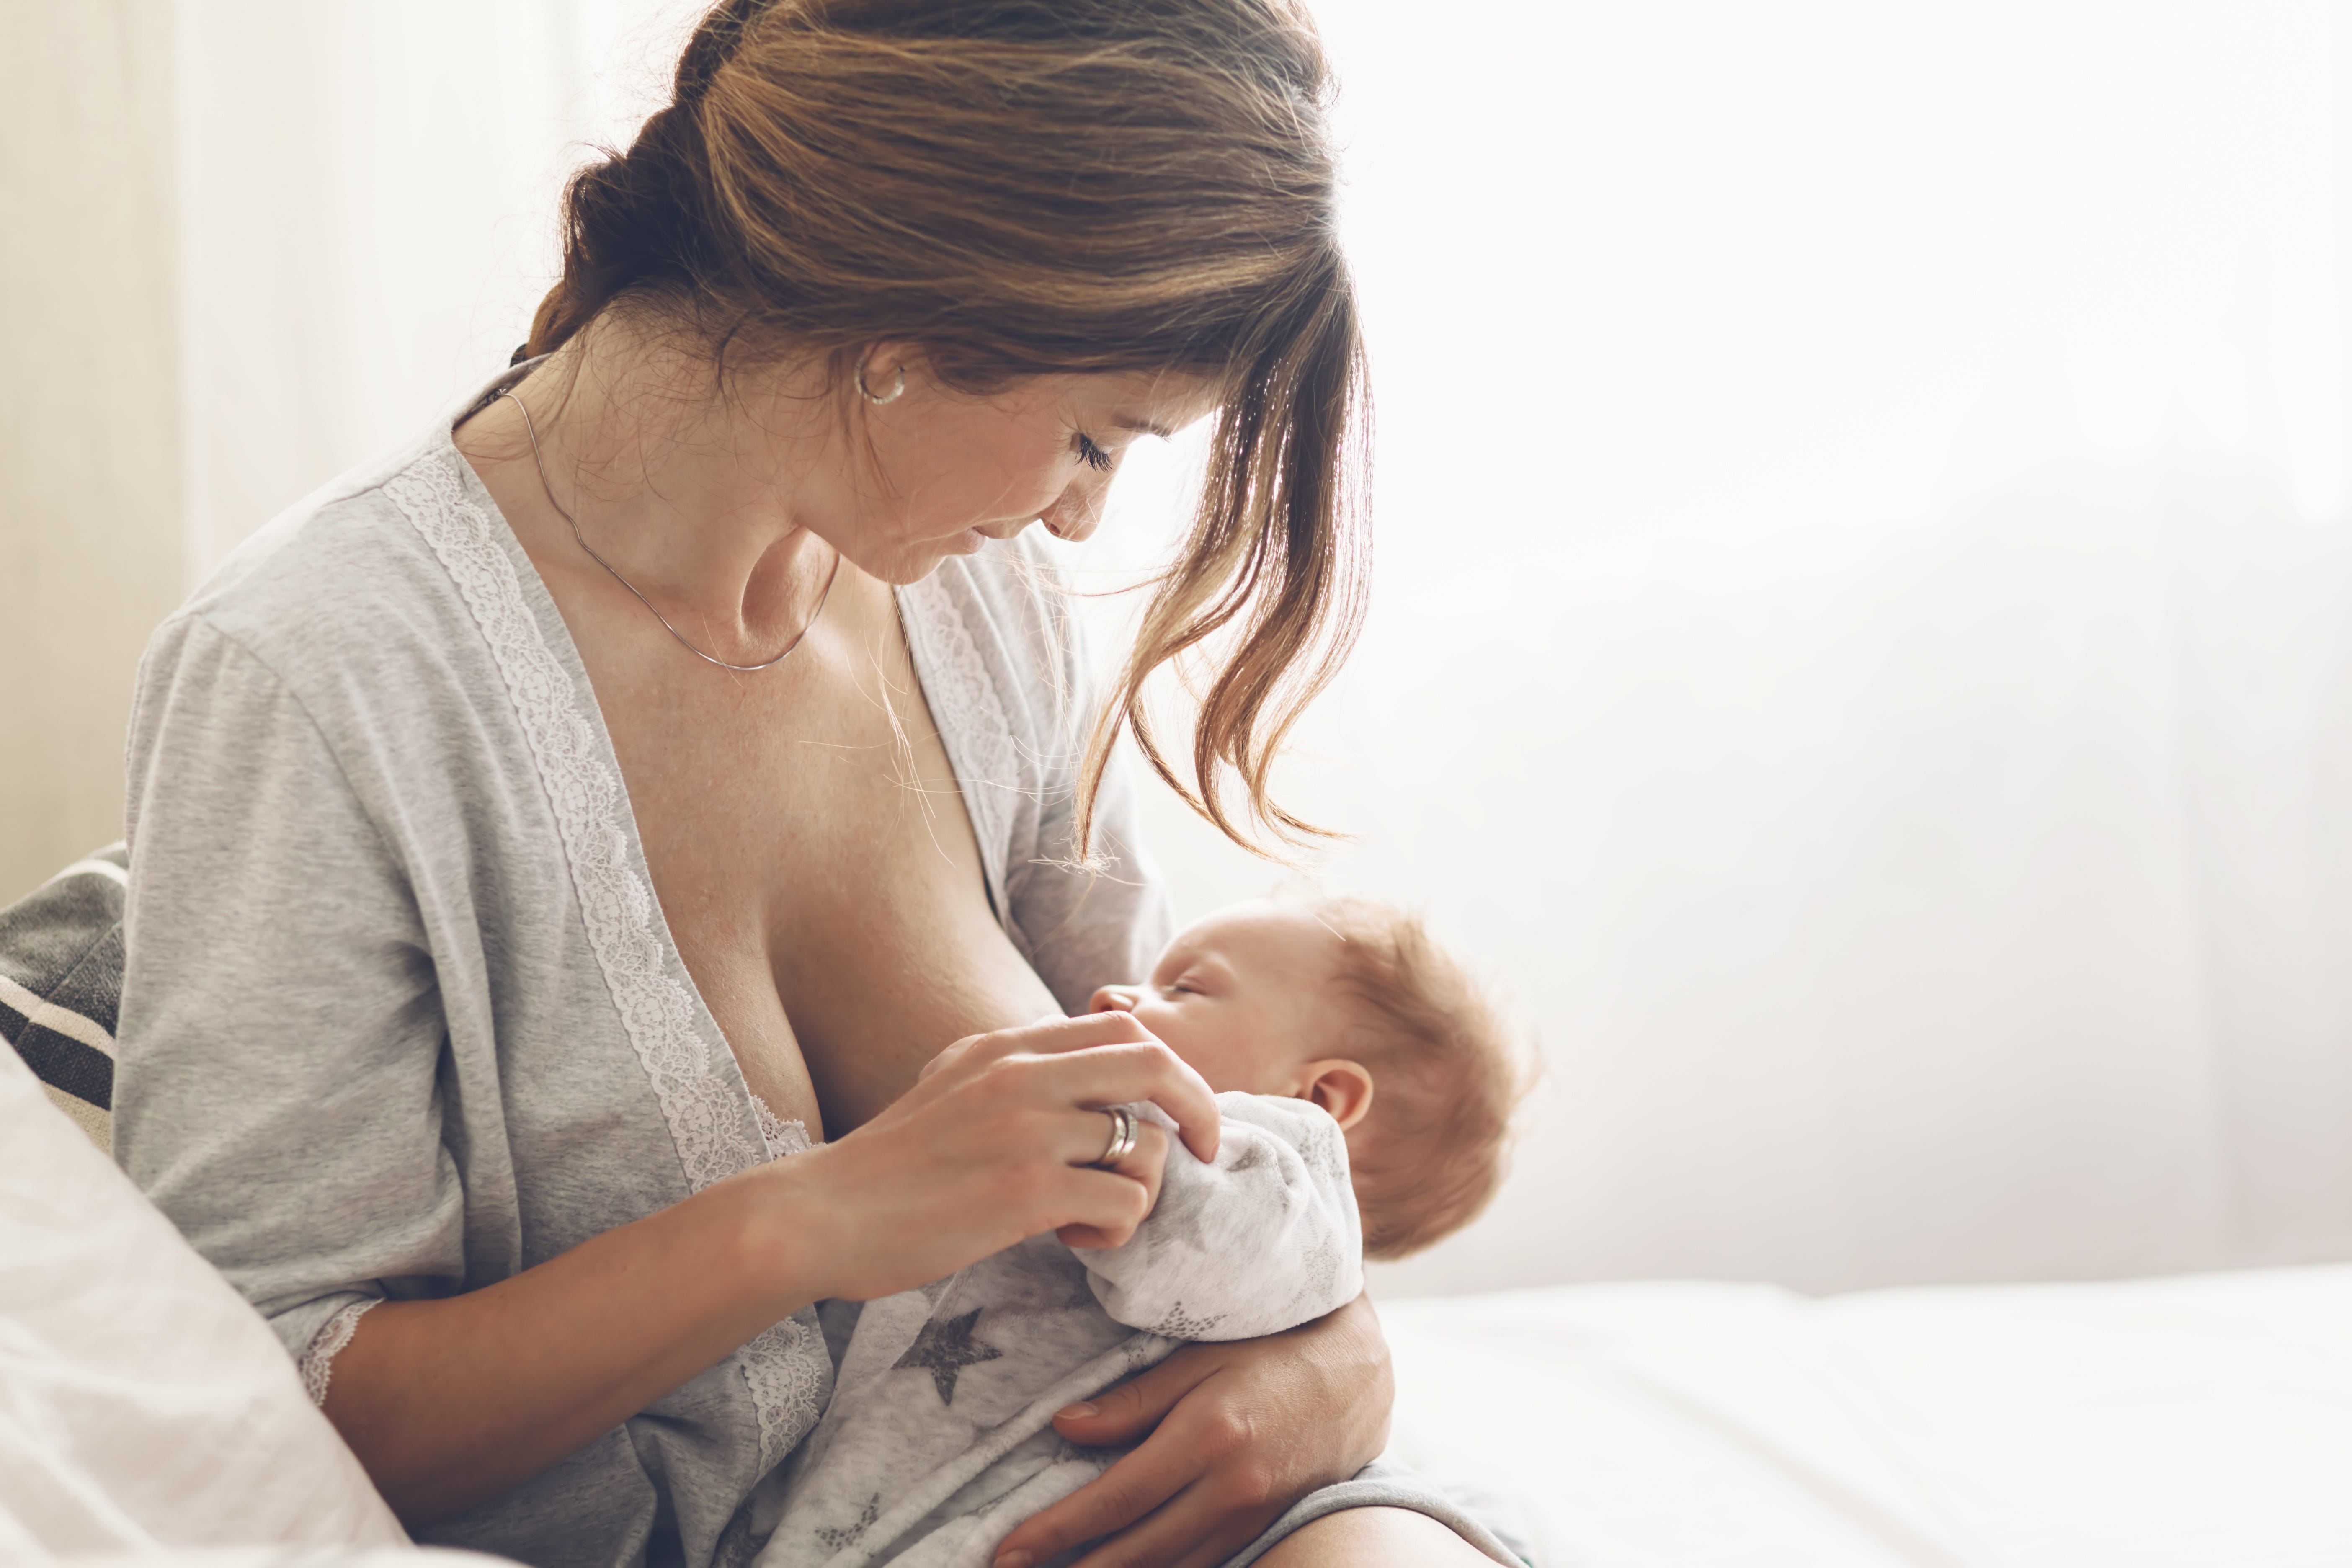 Where to Start with Breastfeeding and Breast Pumping